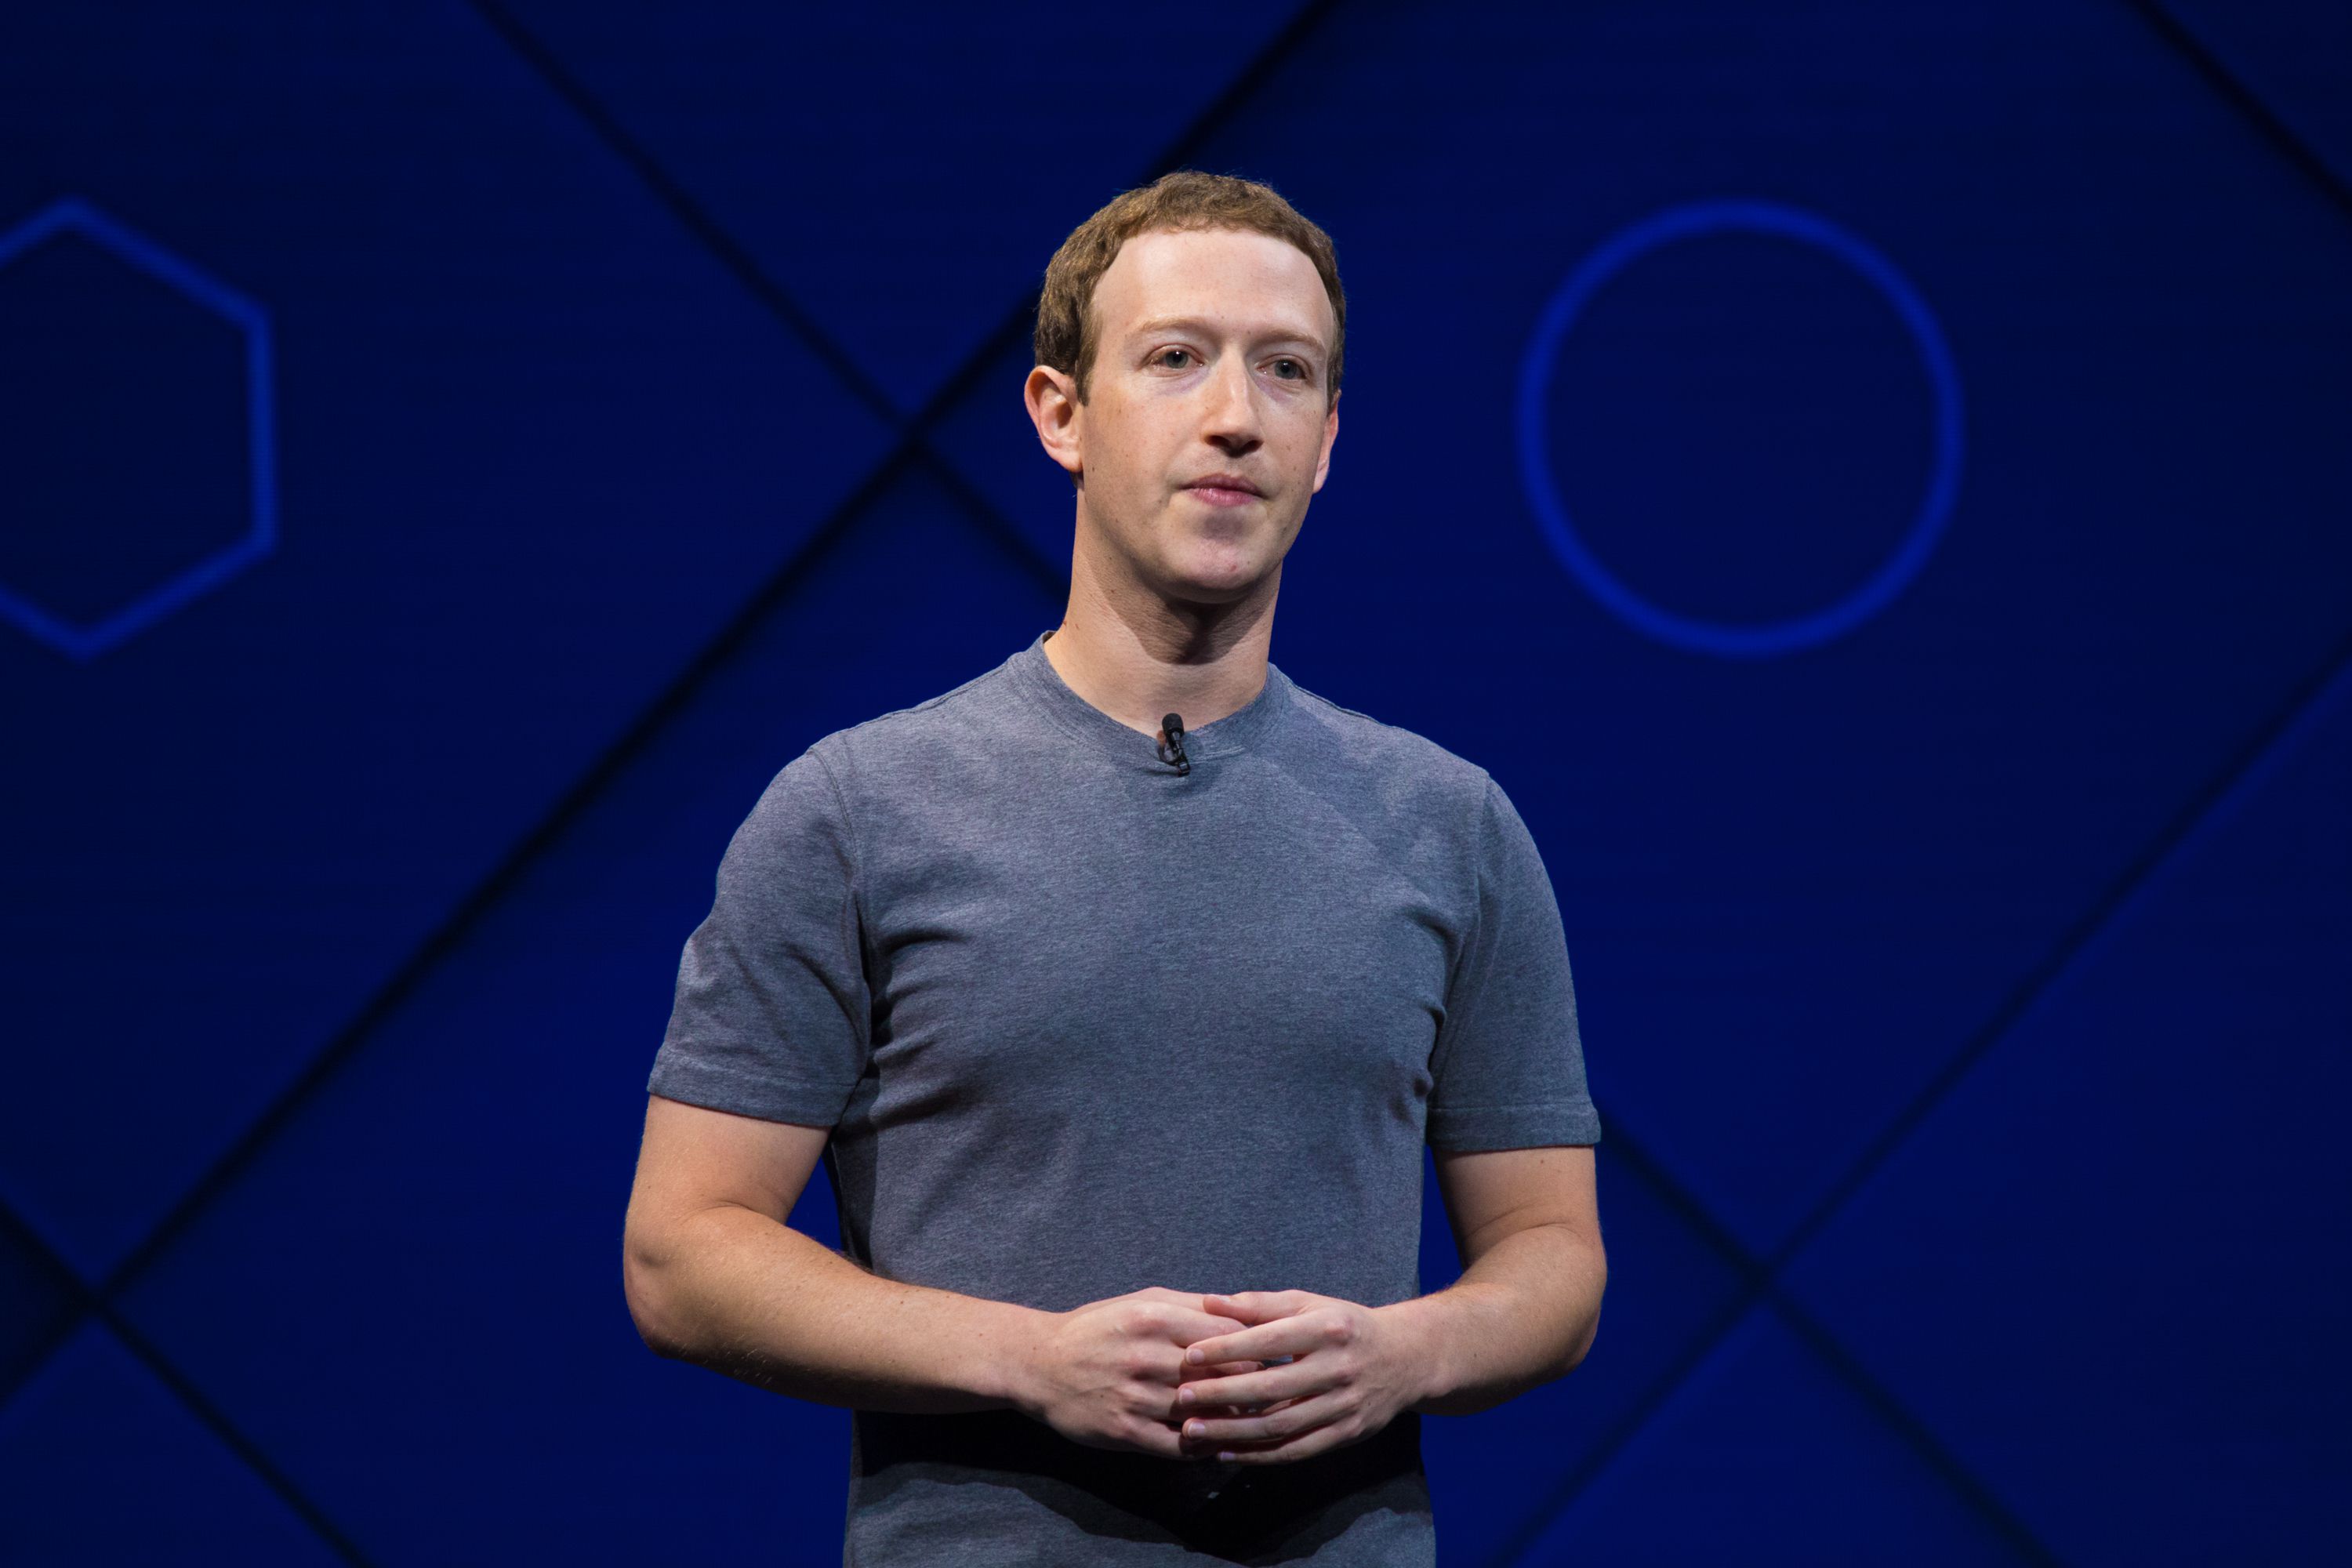 Facebook will now introduce facial recognition for account security